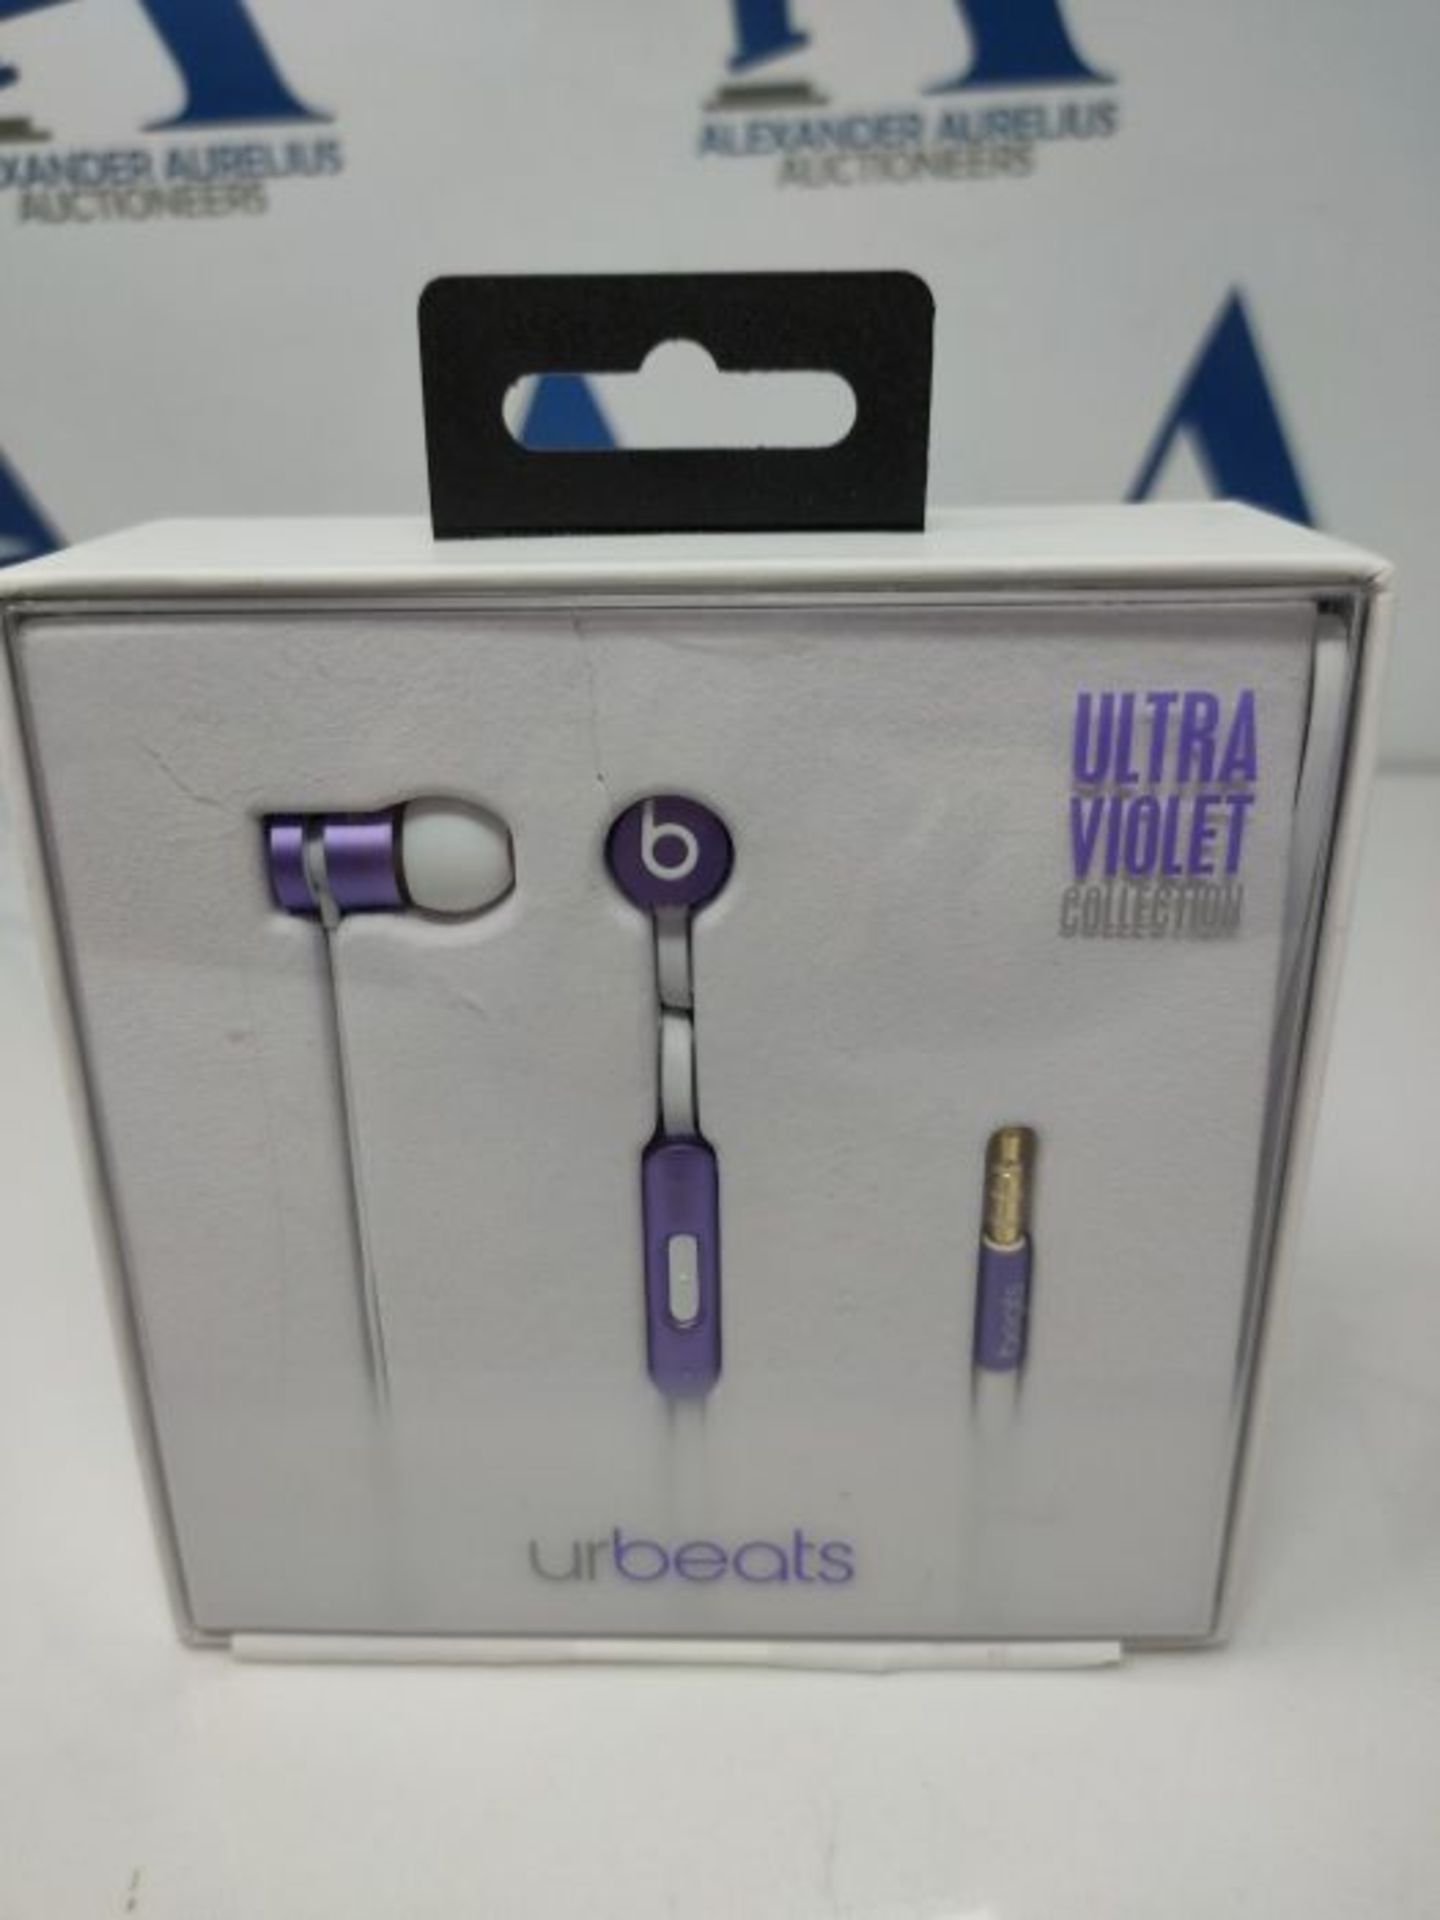 RRP £99.00 Beats by Dr. Dre UrBeats In-Ear Headphones - Ultra Violet - Image 2 of 3